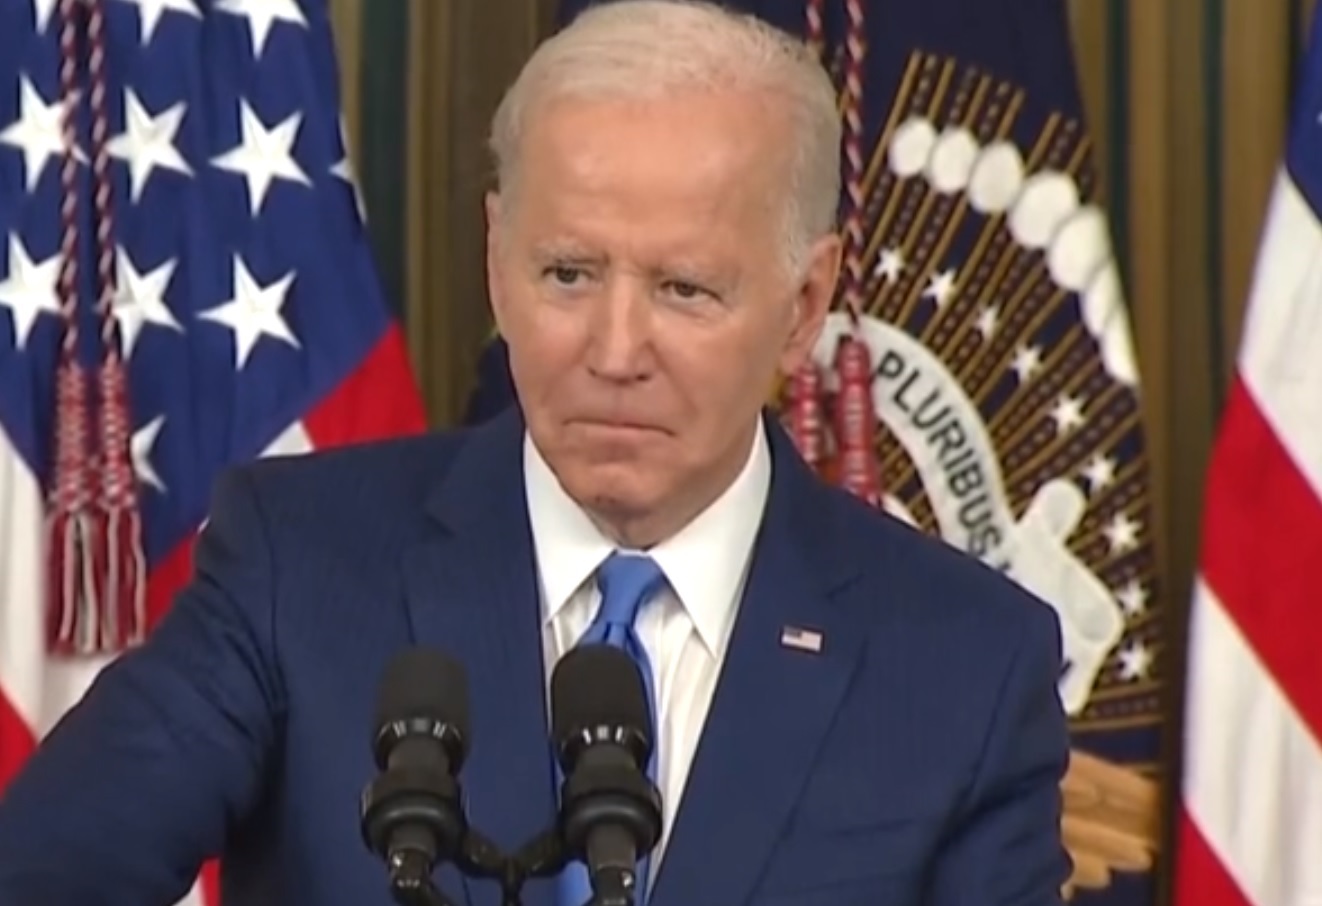 Biden Vows to Keep Nation on Its Current Disastrous Course, Won't Change a Thing About His Train Wreck Presidency - DC Enquirer